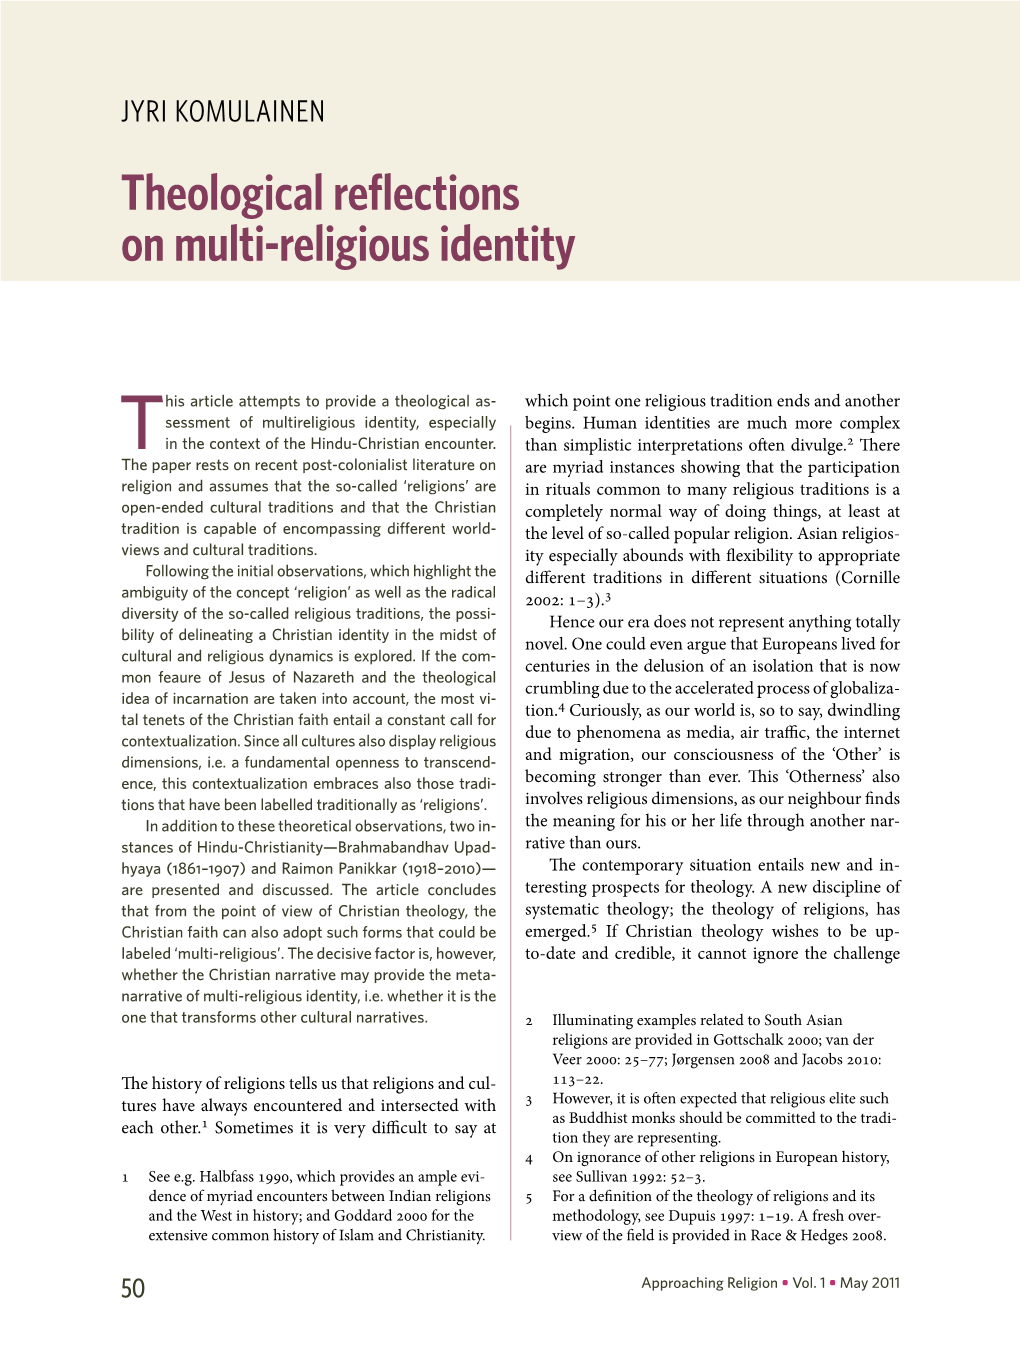 Theological Reflections on Multi-Religious Identity